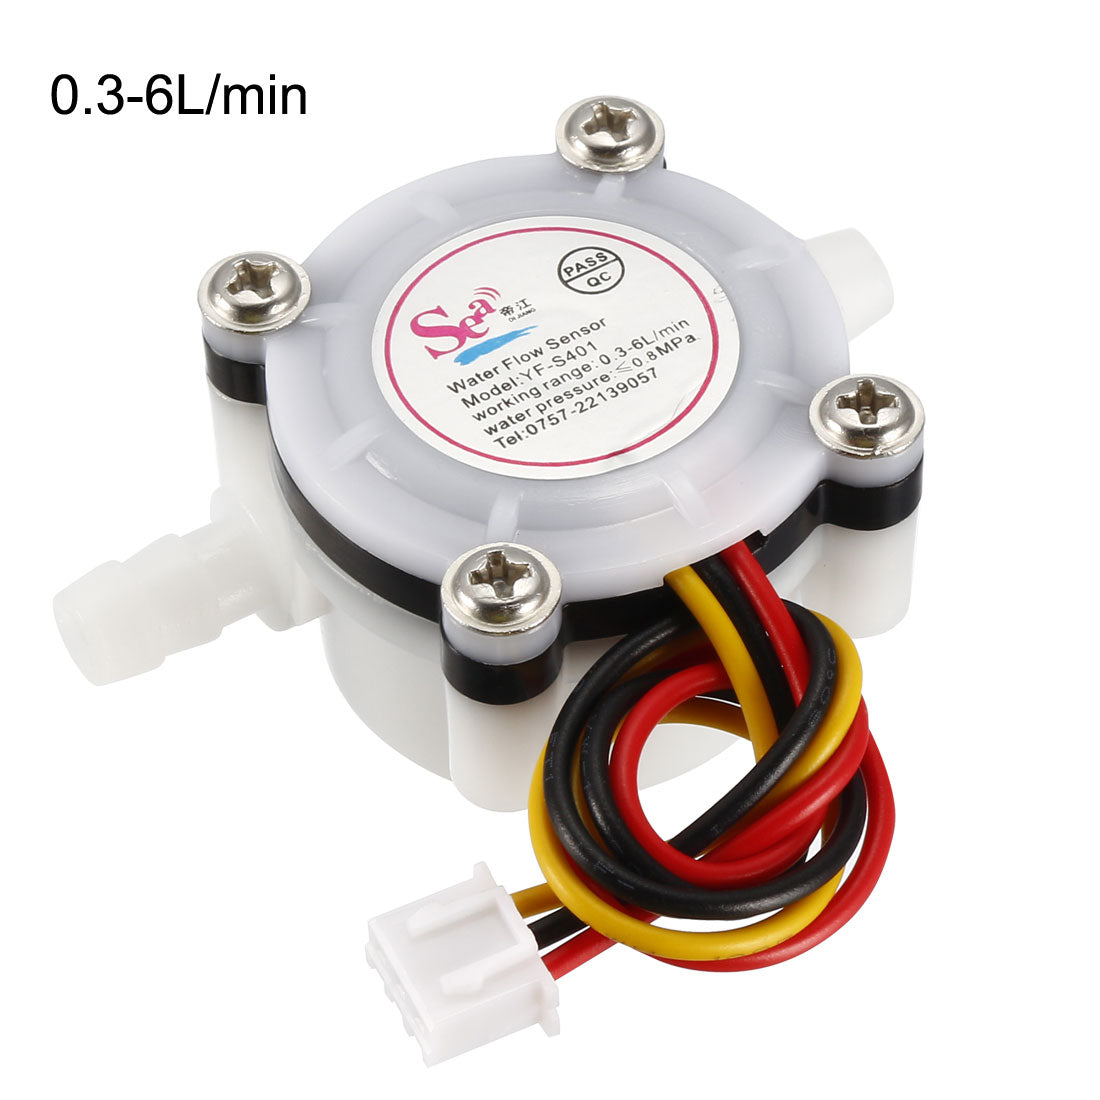 uxcell Uxcell 1/4in Hall Effect Liquid Water Flow Sensor Switch Flowmeter Counter DC5V 0.3-6L/min White YF-S401